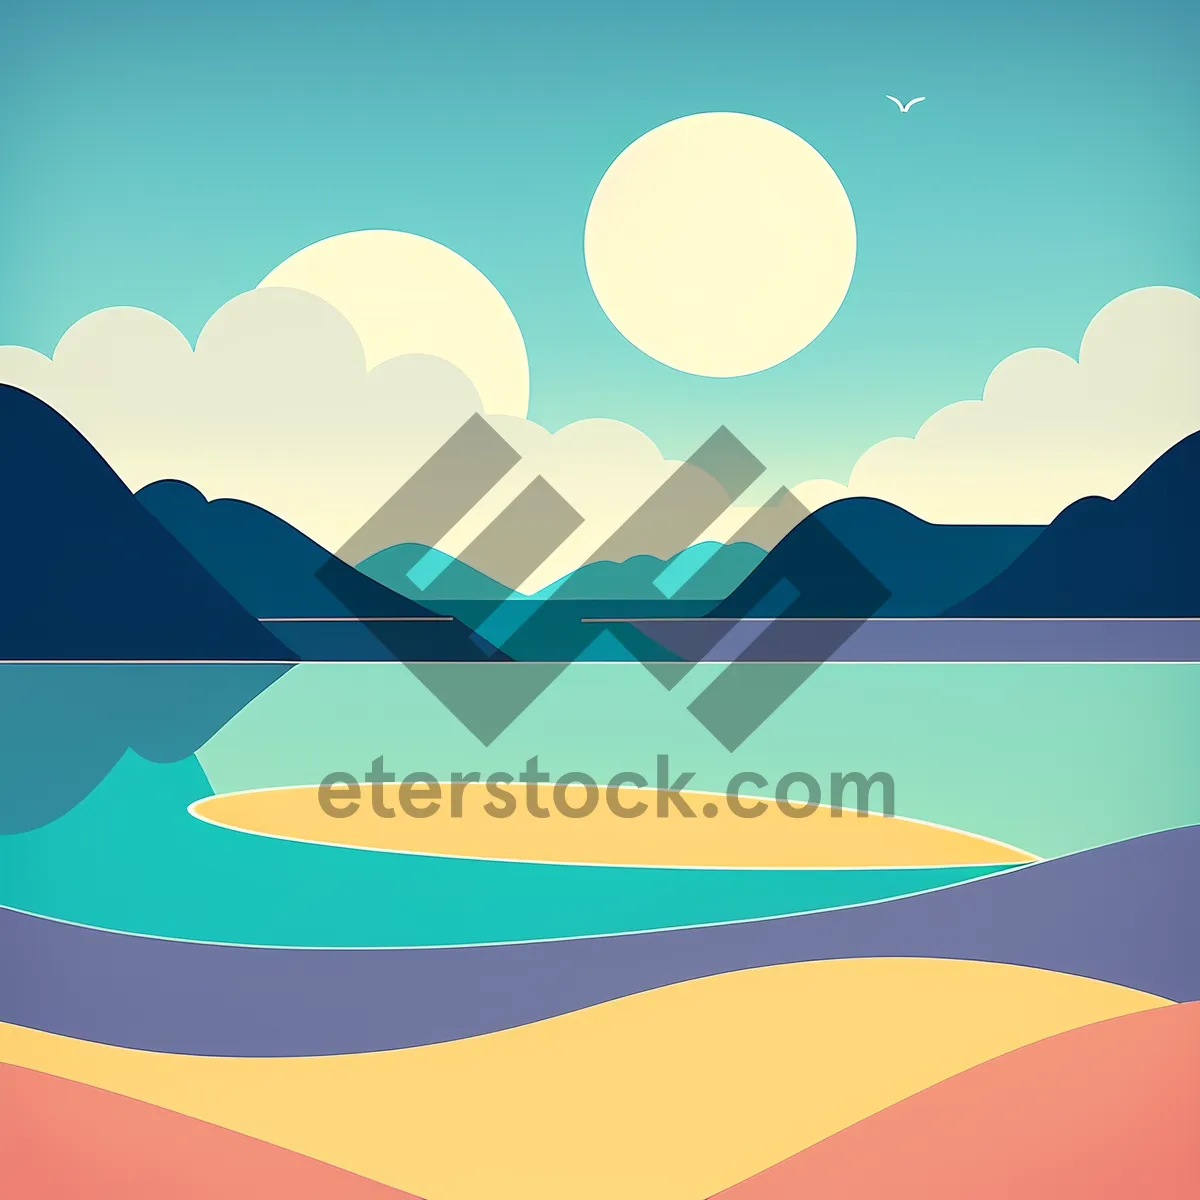 Picture of Country Waves: Artistic Symbolic Graphic Design